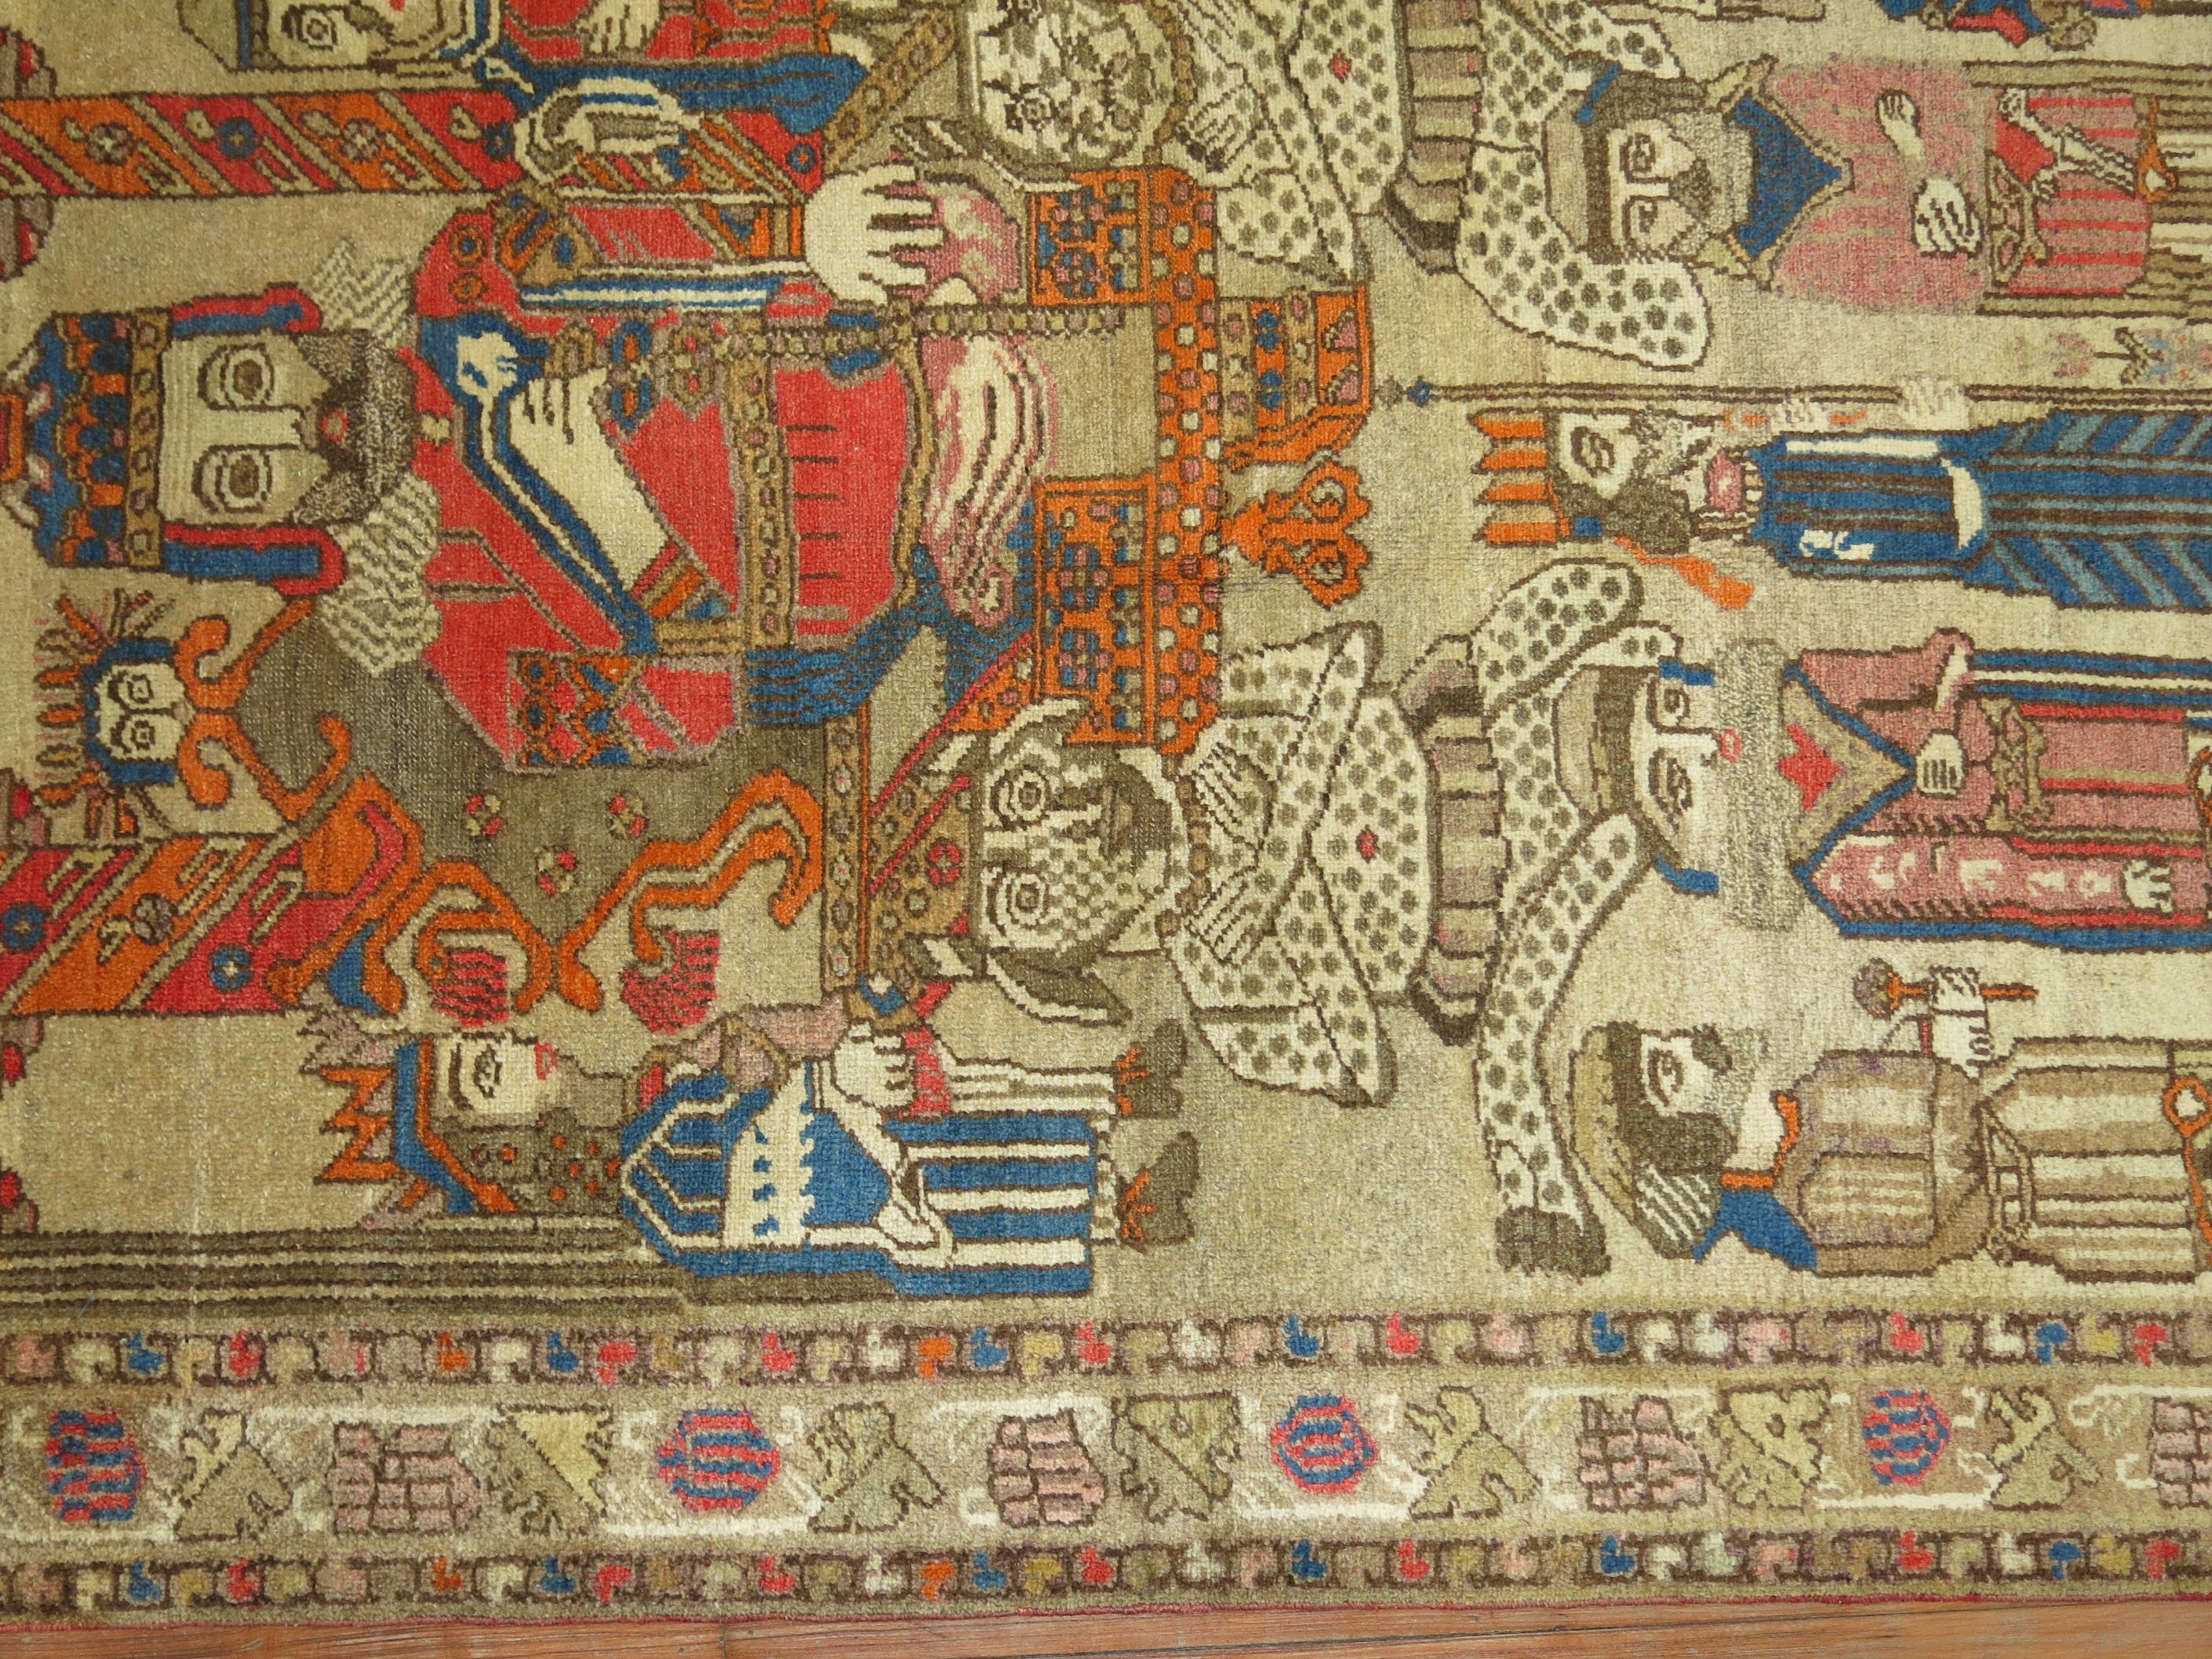 Hand-Woven Antique Persian Pictorial Rug